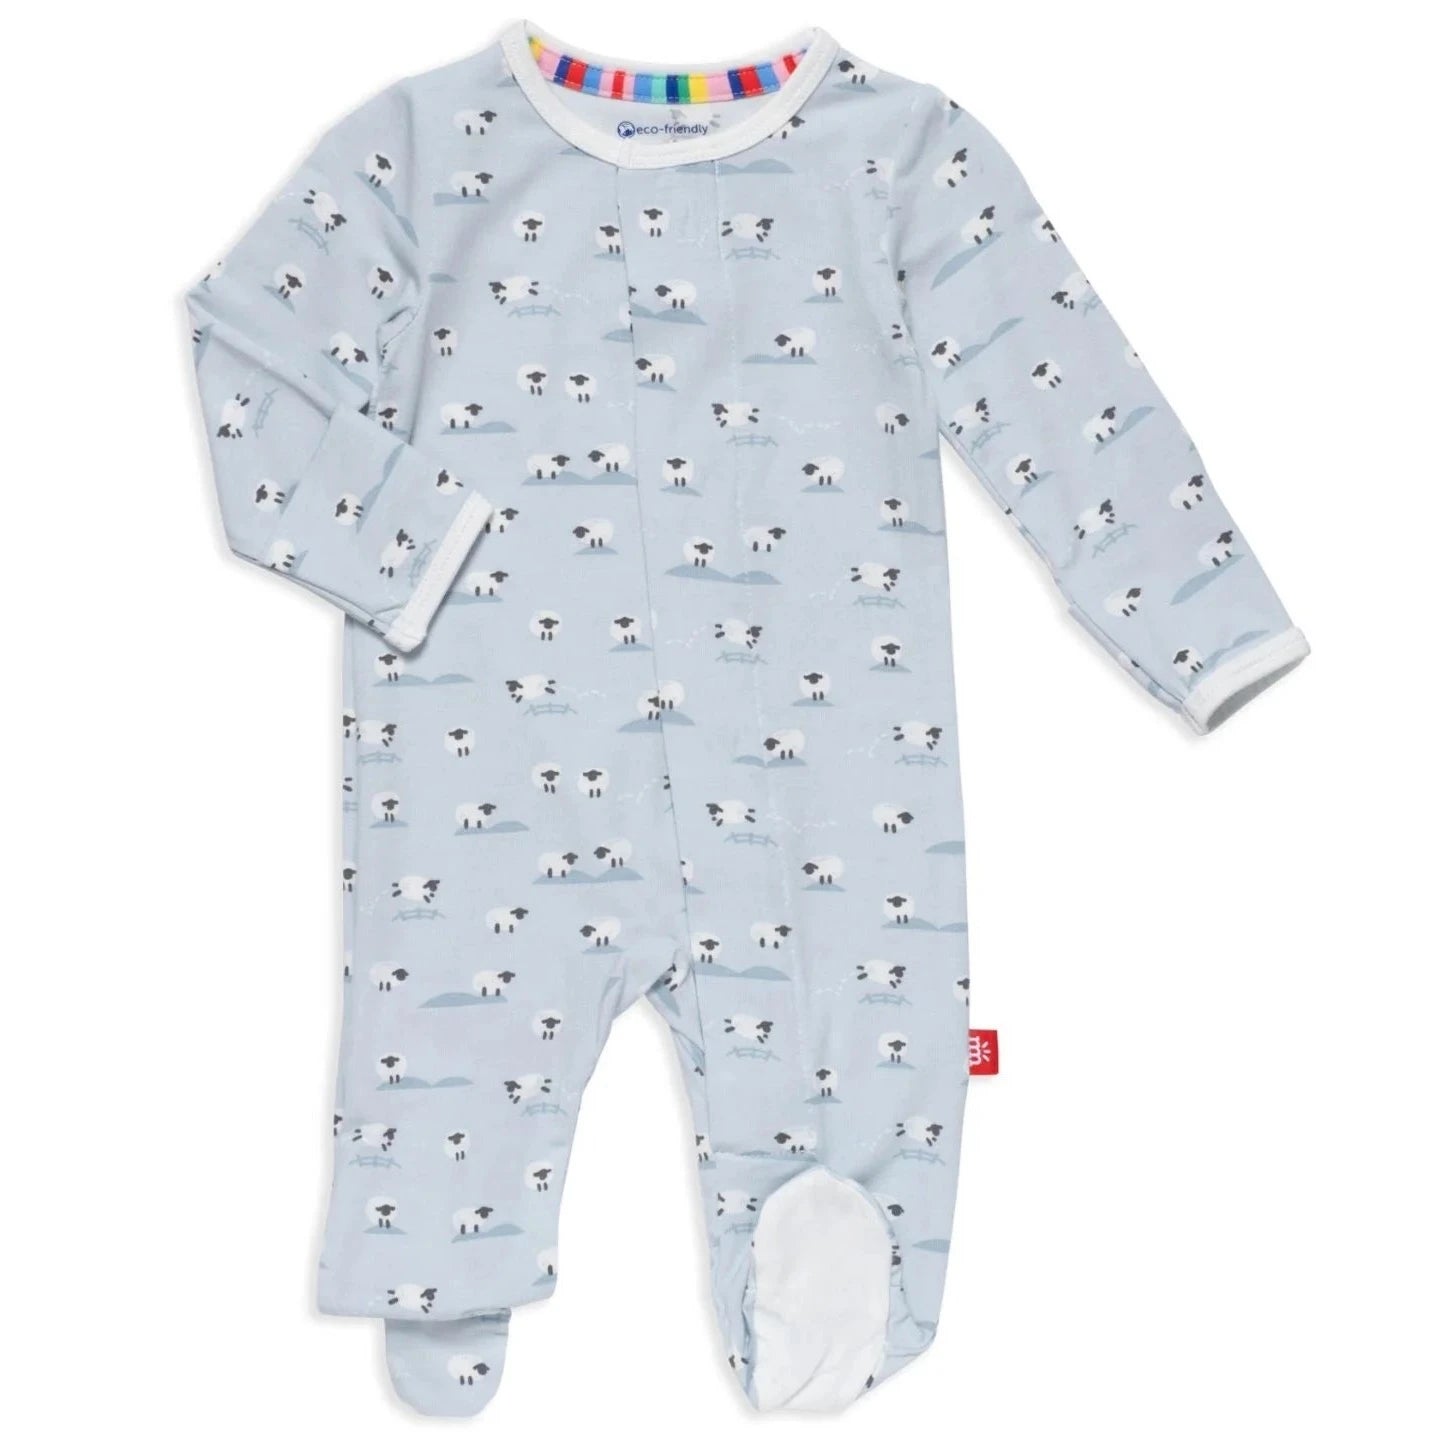 Blue long sleeve baby onesie with sheep on it